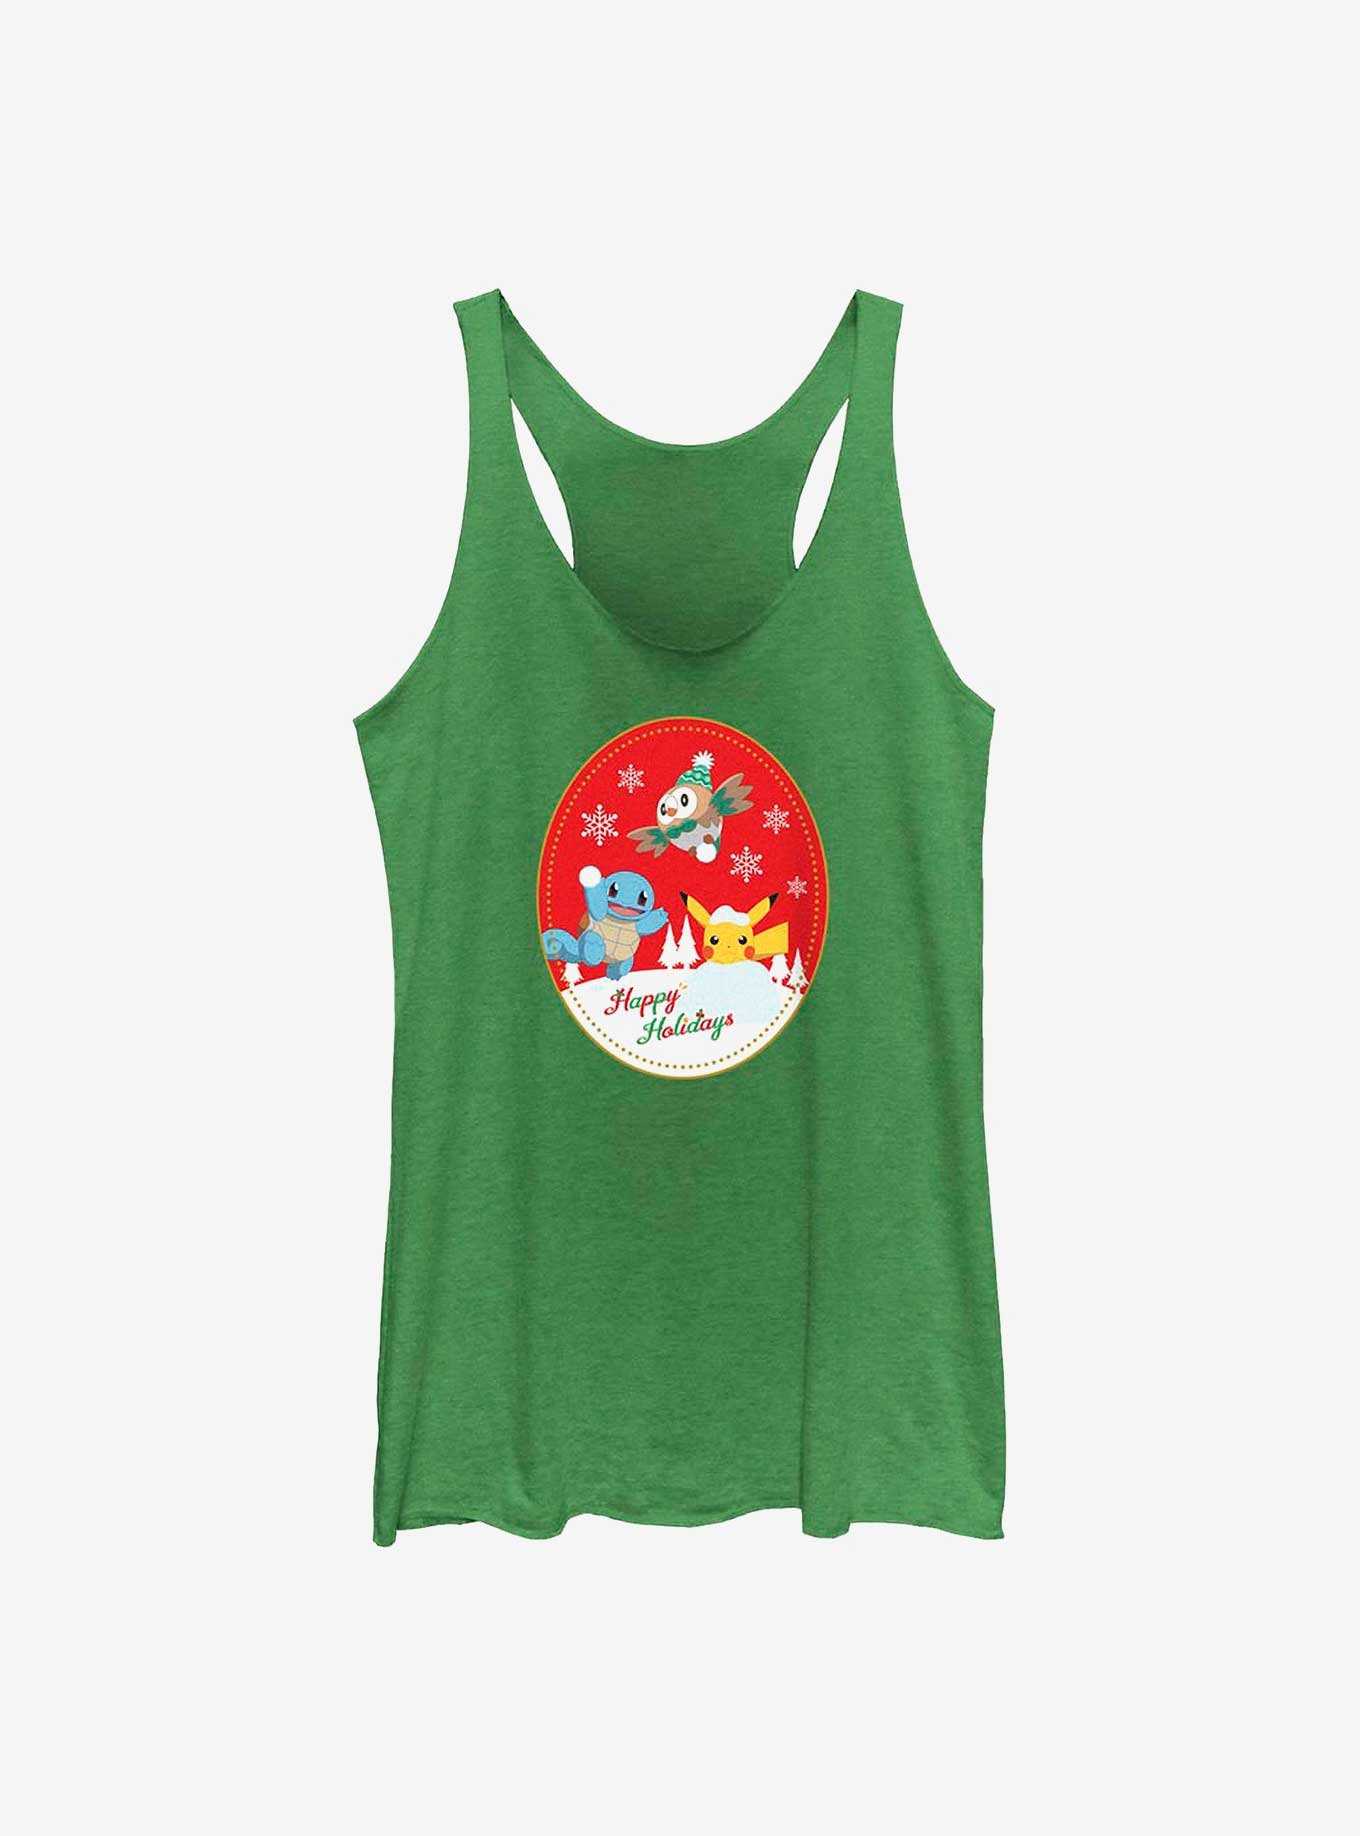 Pokémon Holiday Badge Squirtle, Rowlet And Pikachu Womens Tank Top, , hi-res